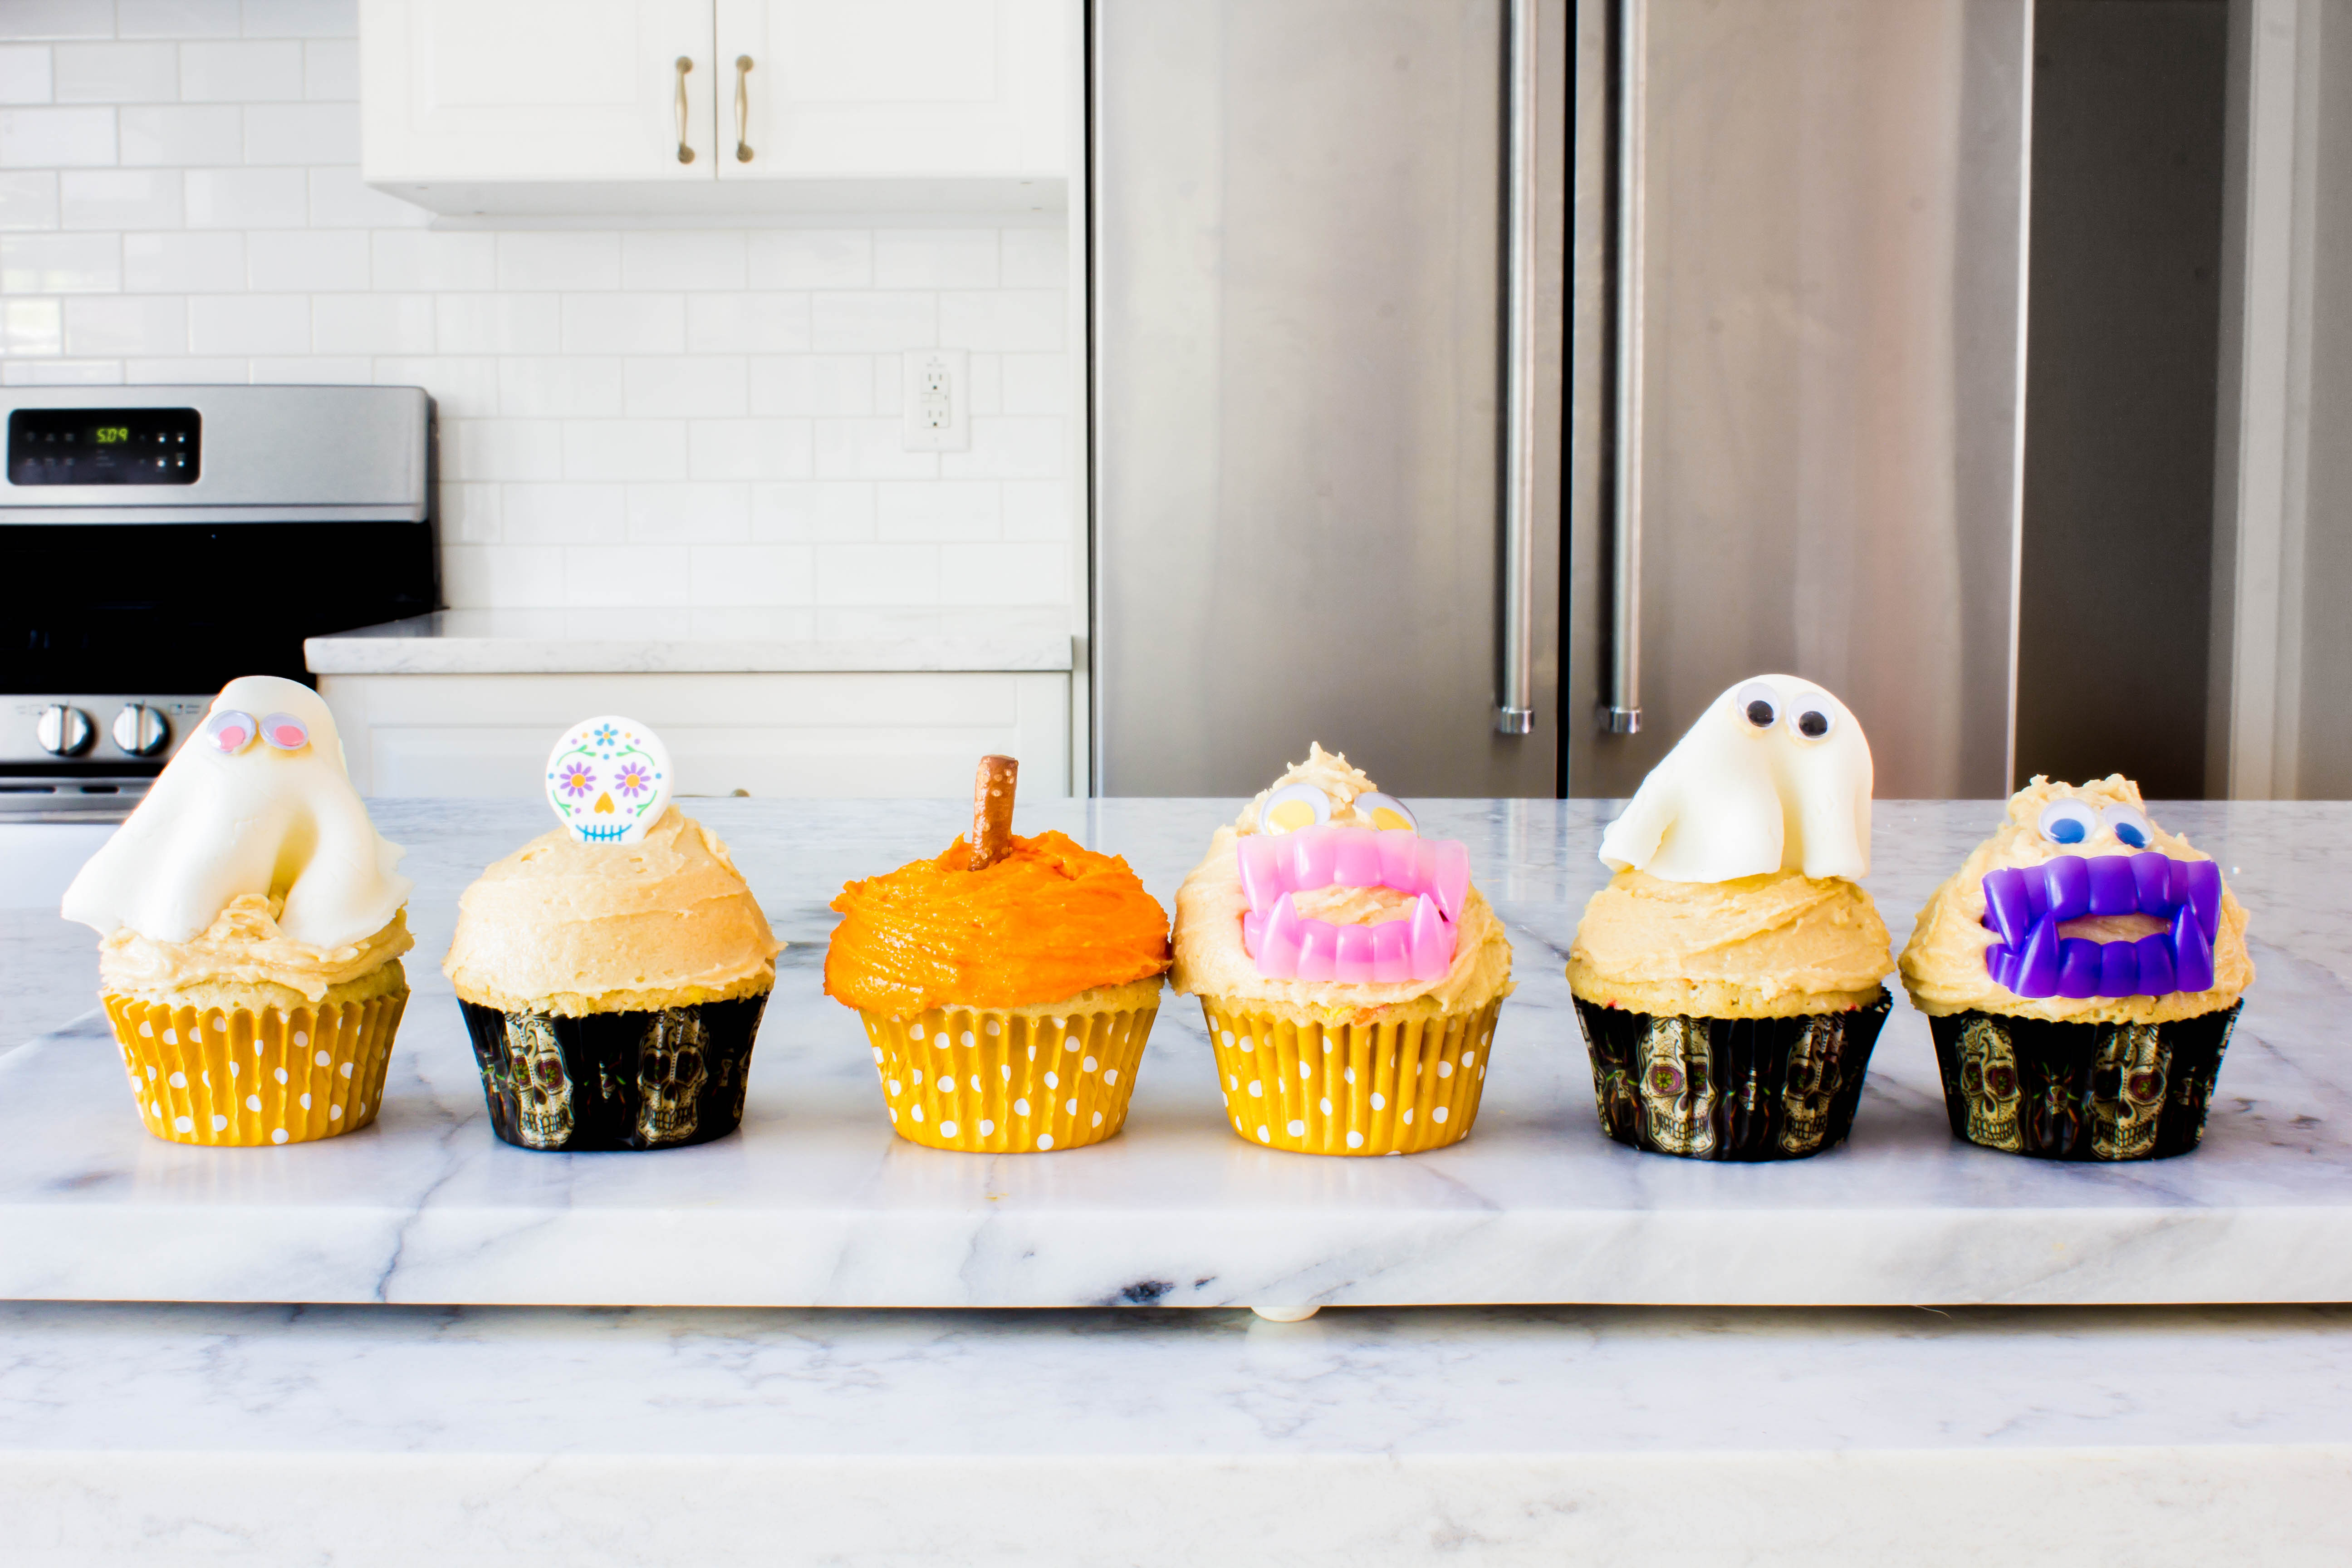 Festive and fun Halloween cupcake decorating ideas with black cherry funfetti cupcakes + maple brown sugar frosting | immaEATthat.